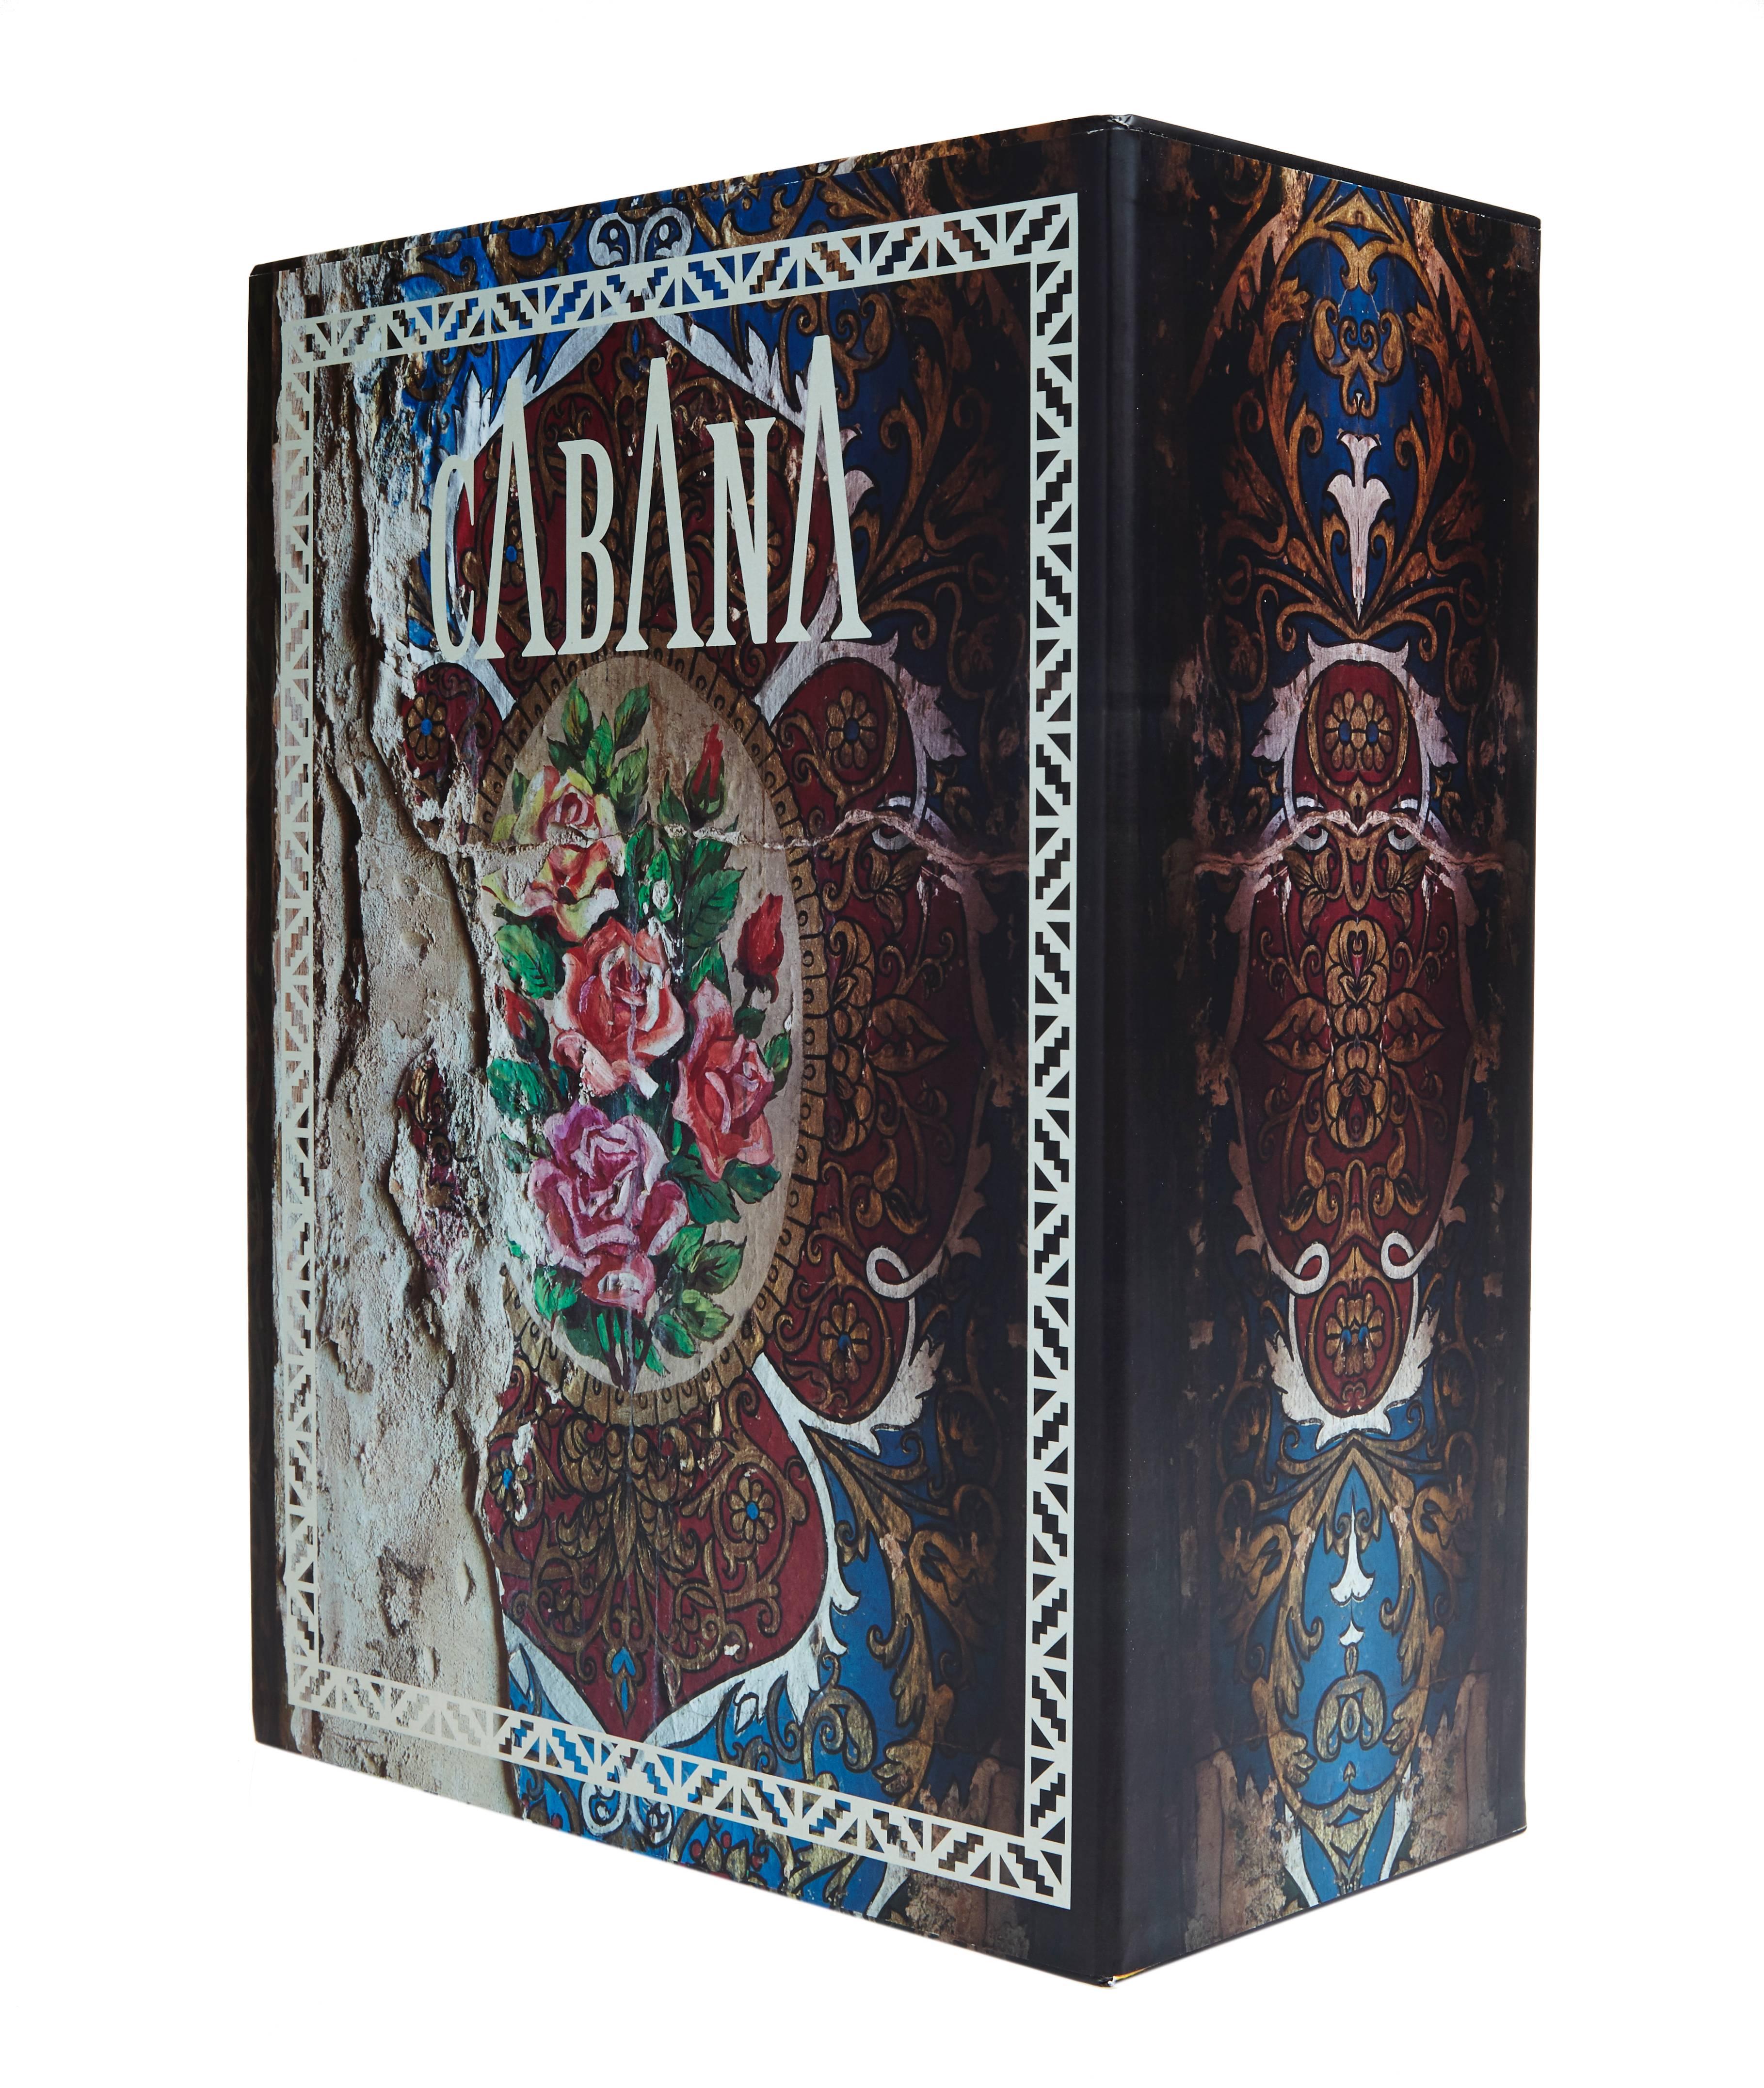 British Limited Edition Cabana Box Set, with All Six Issues